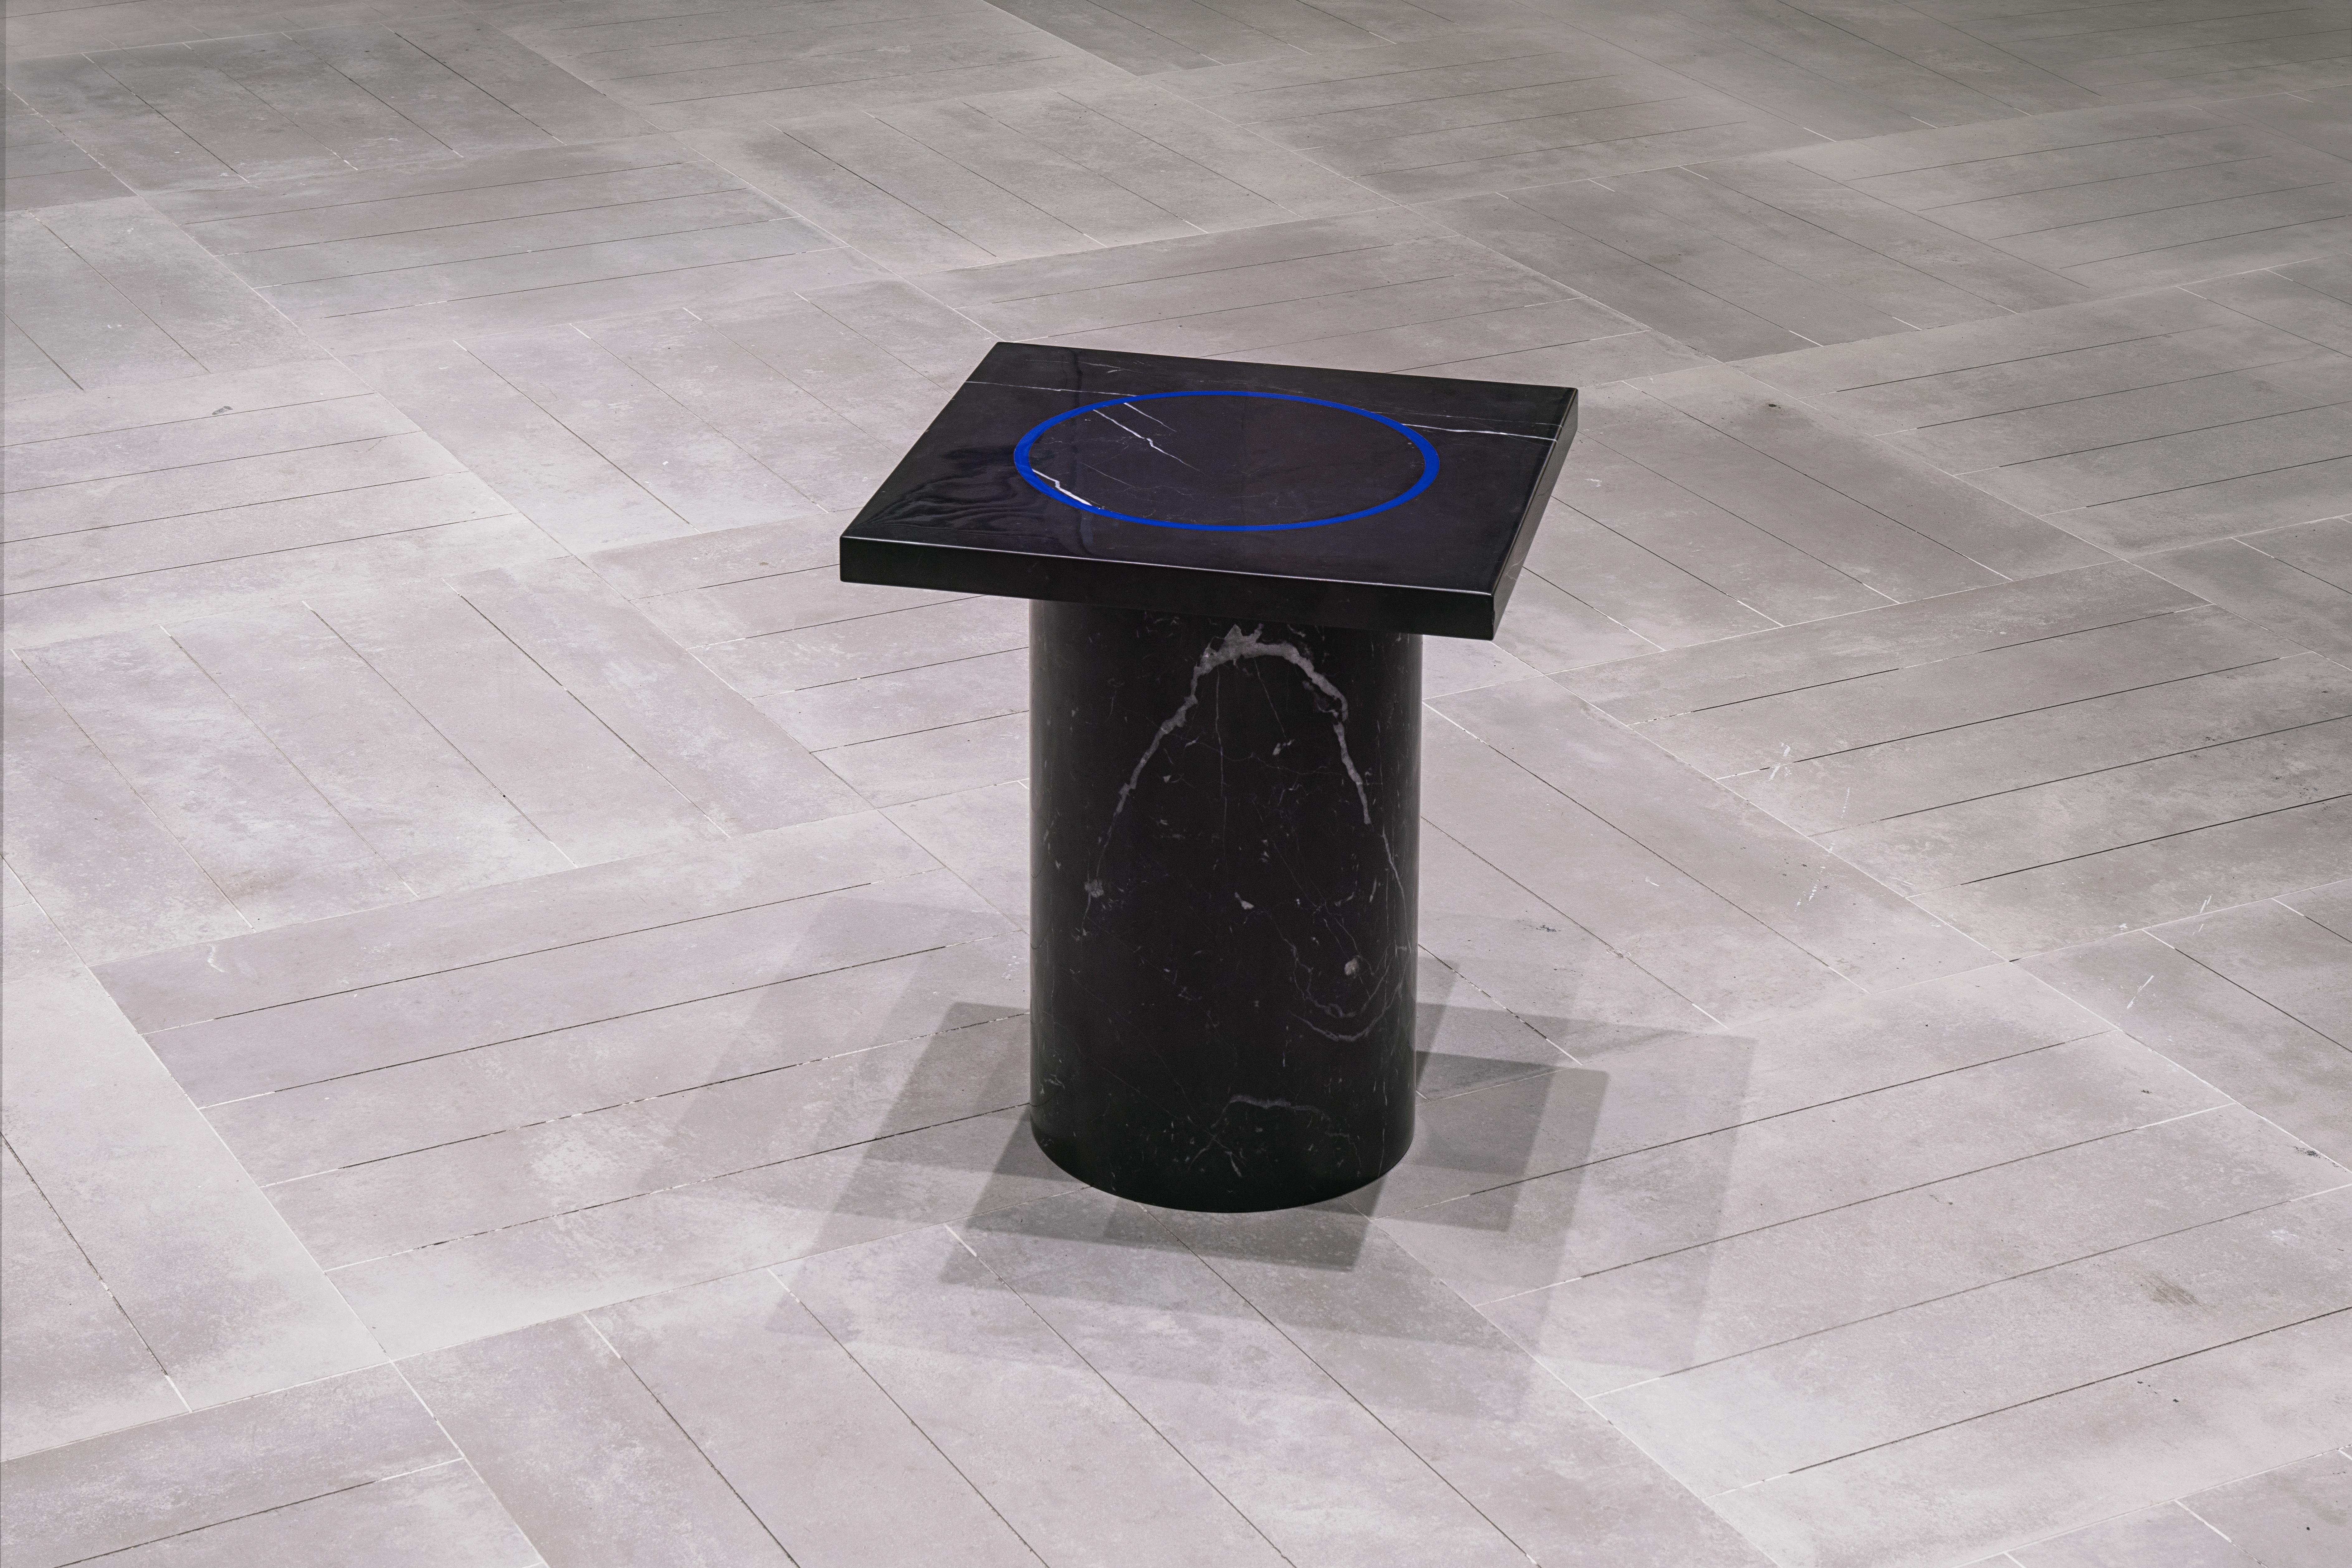 'DISLOCATION' collection by Buzao, small table
Black Marquina marble
Measures: 40 x 40 x H 38 cm

Studio Buzao from Guangzhou (China) is exploring innovation with furniture and lighting design. From marble to lava stone, from electroplated stainless